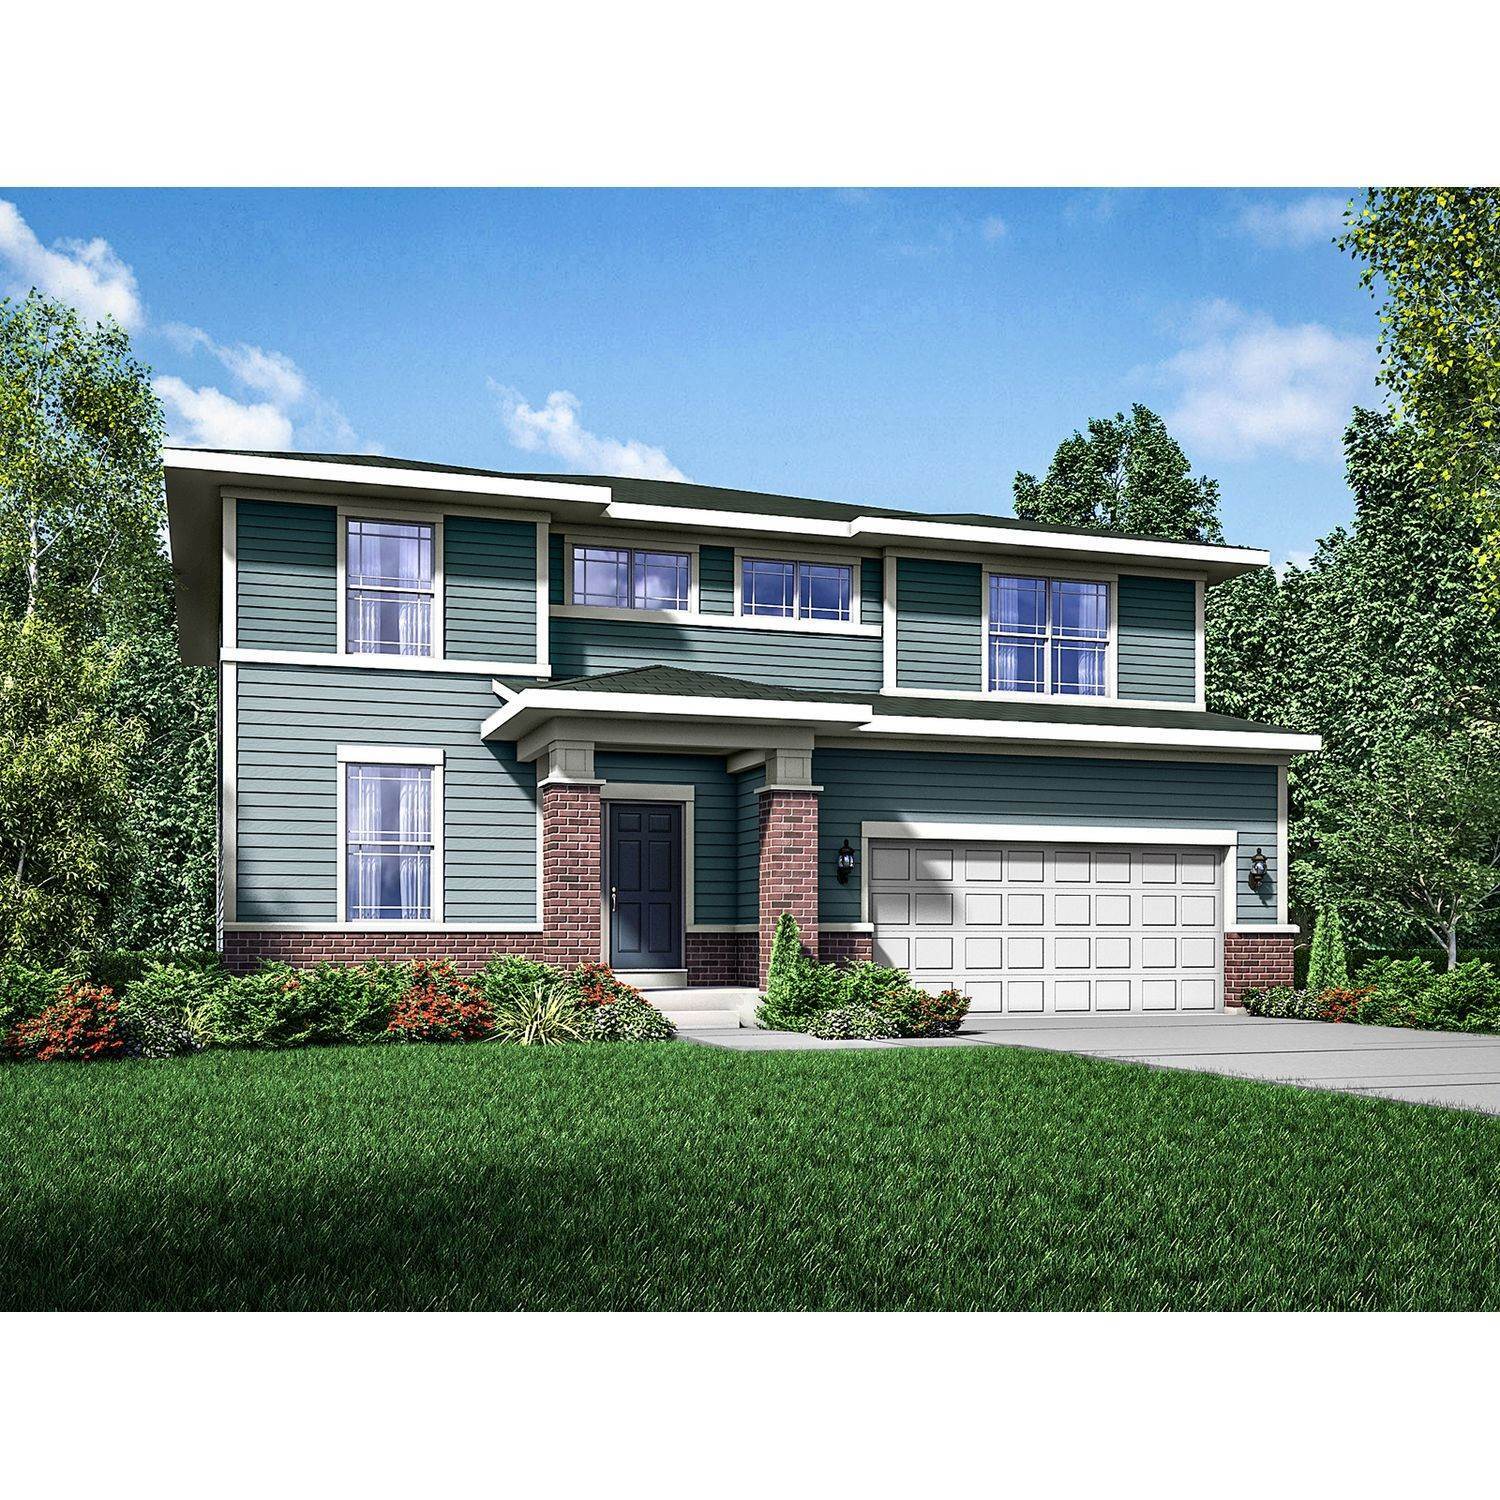 32. Single Family for Sale at Sun Prairie, WI 53590